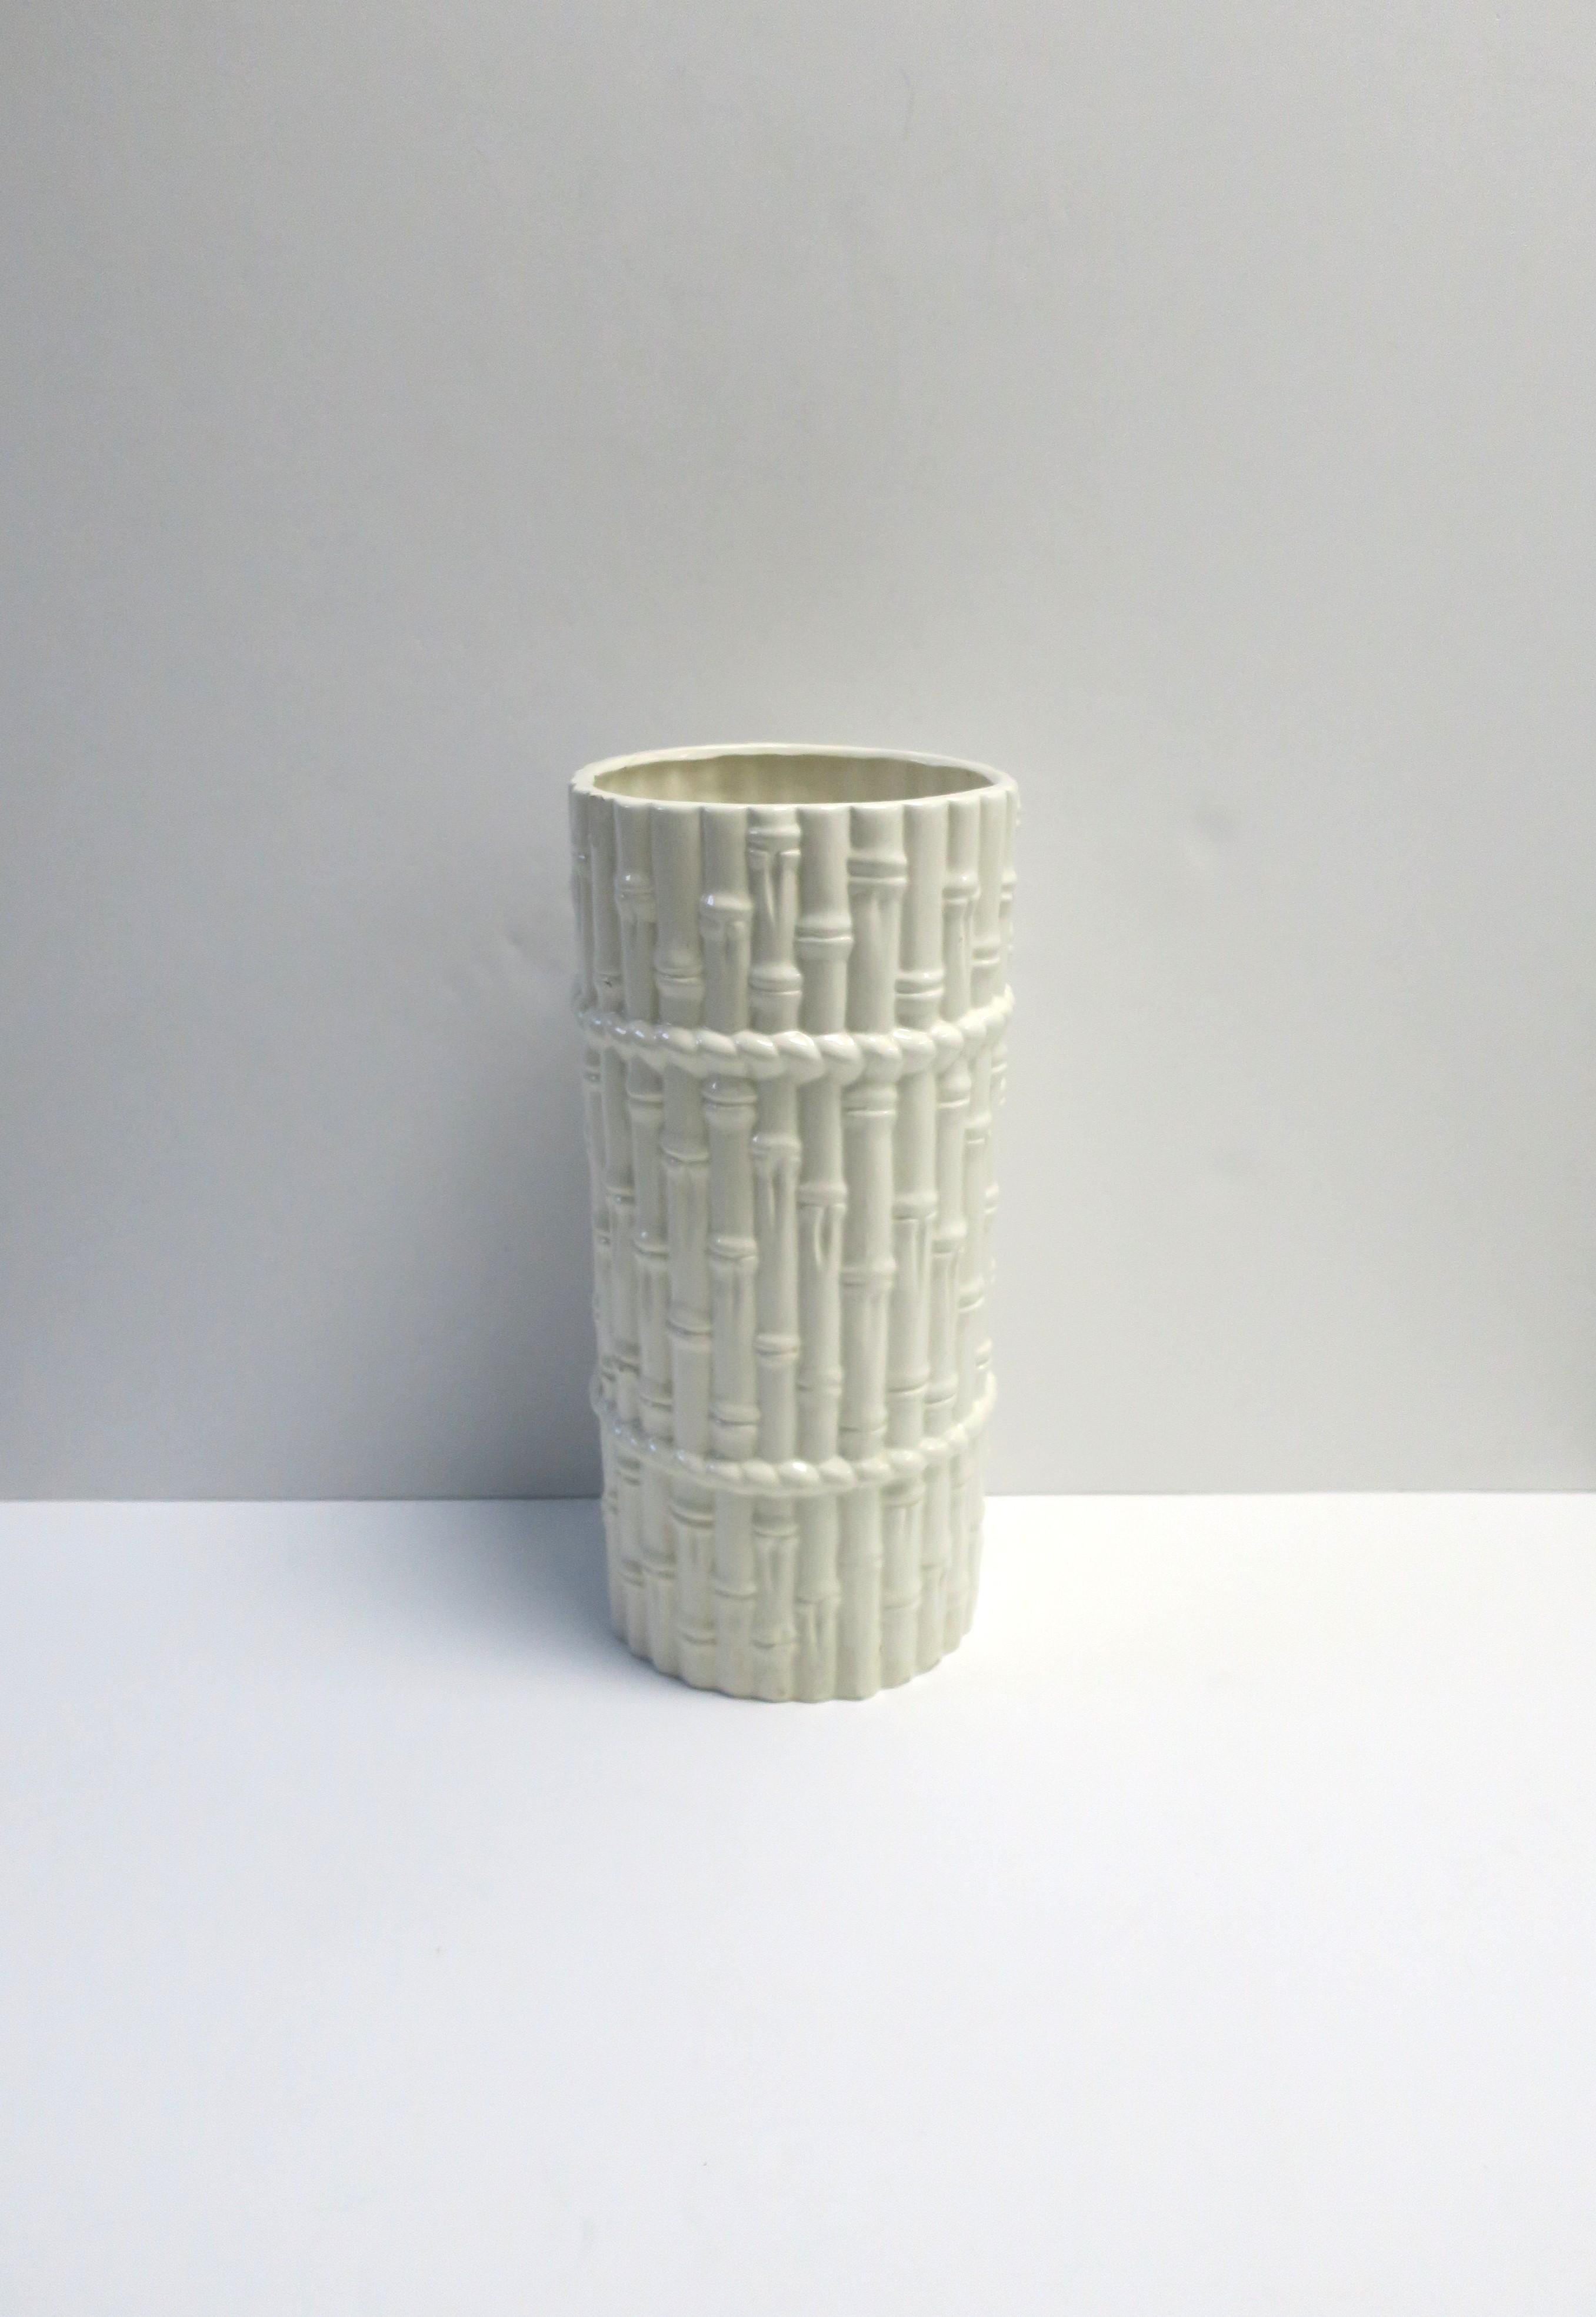 A white glazed ceramic umbrella holder stand with bamboo design, circa late-20th century, 1988. Piece can also double as a tall vase. Measurements: 8